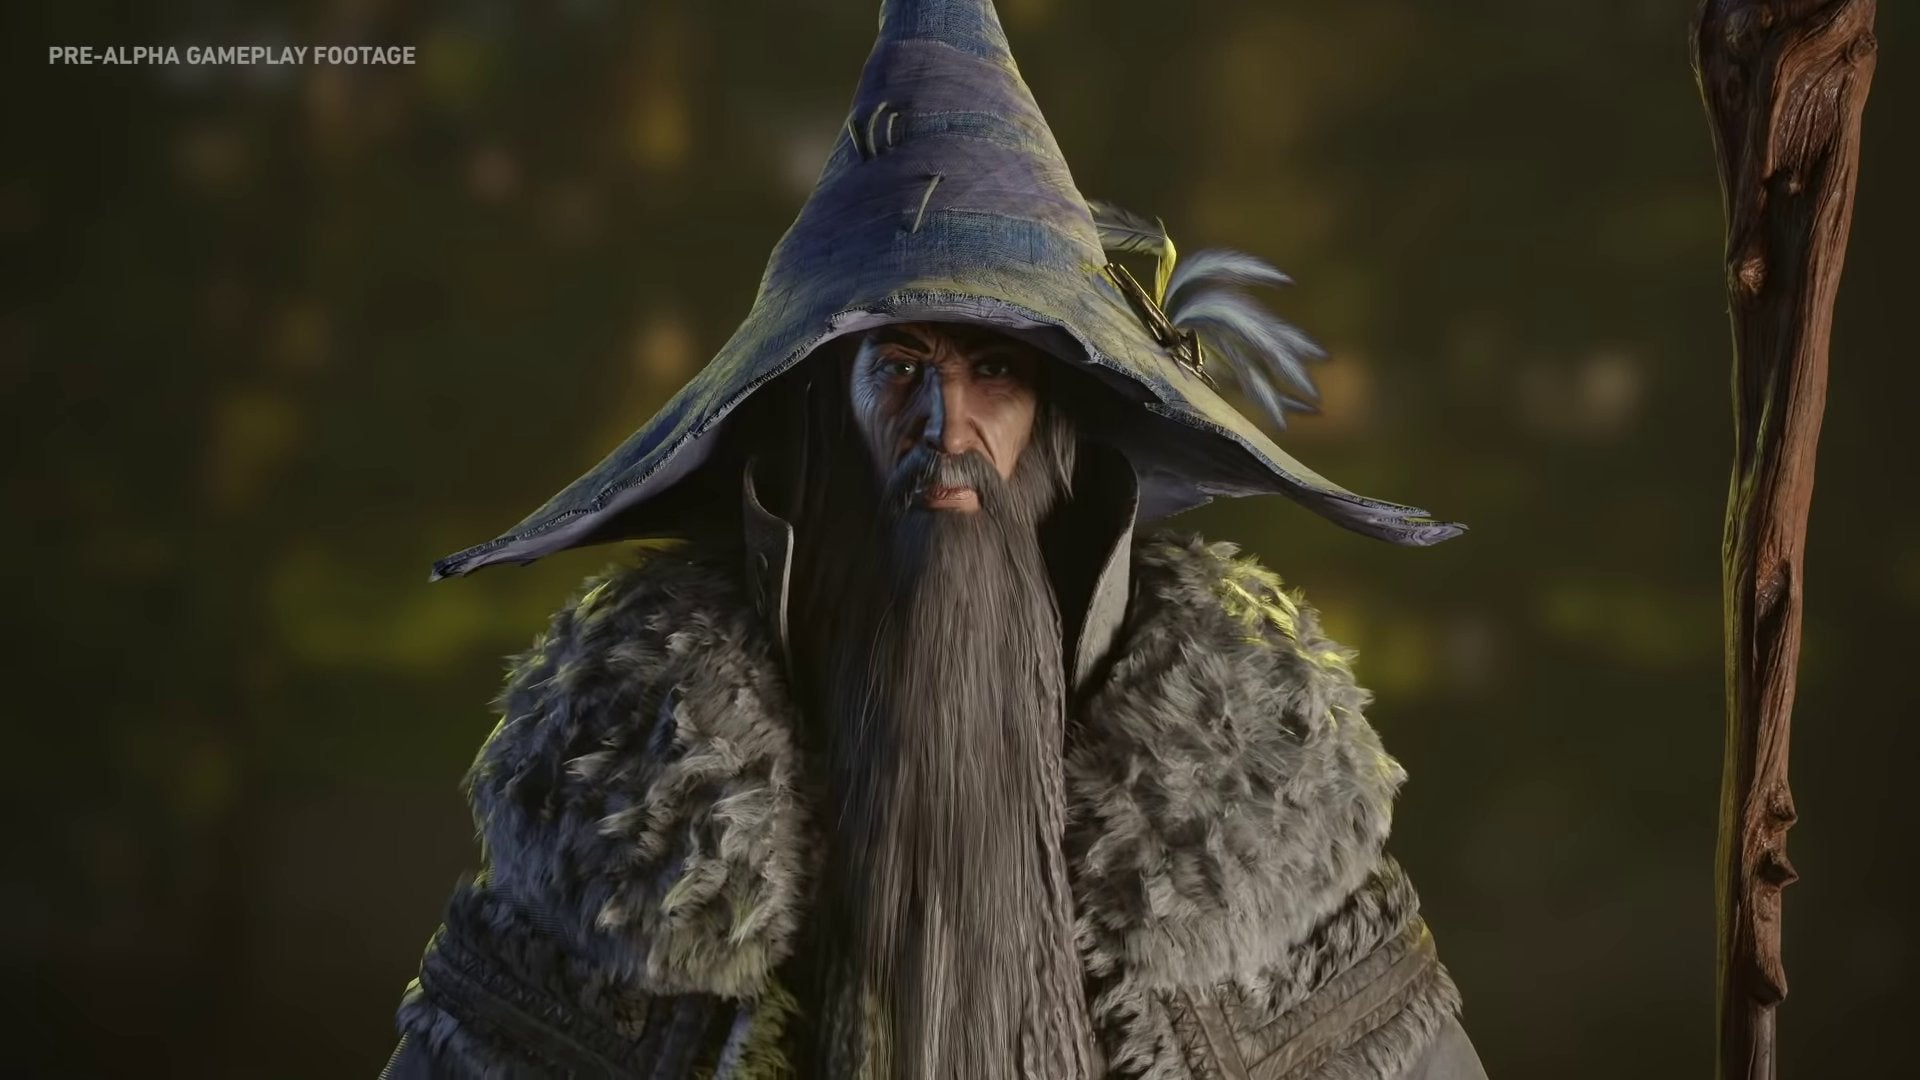 Gandalf from The Lord Of The Rings: Gollum, with a very large hat and a big furry collar on his coat.